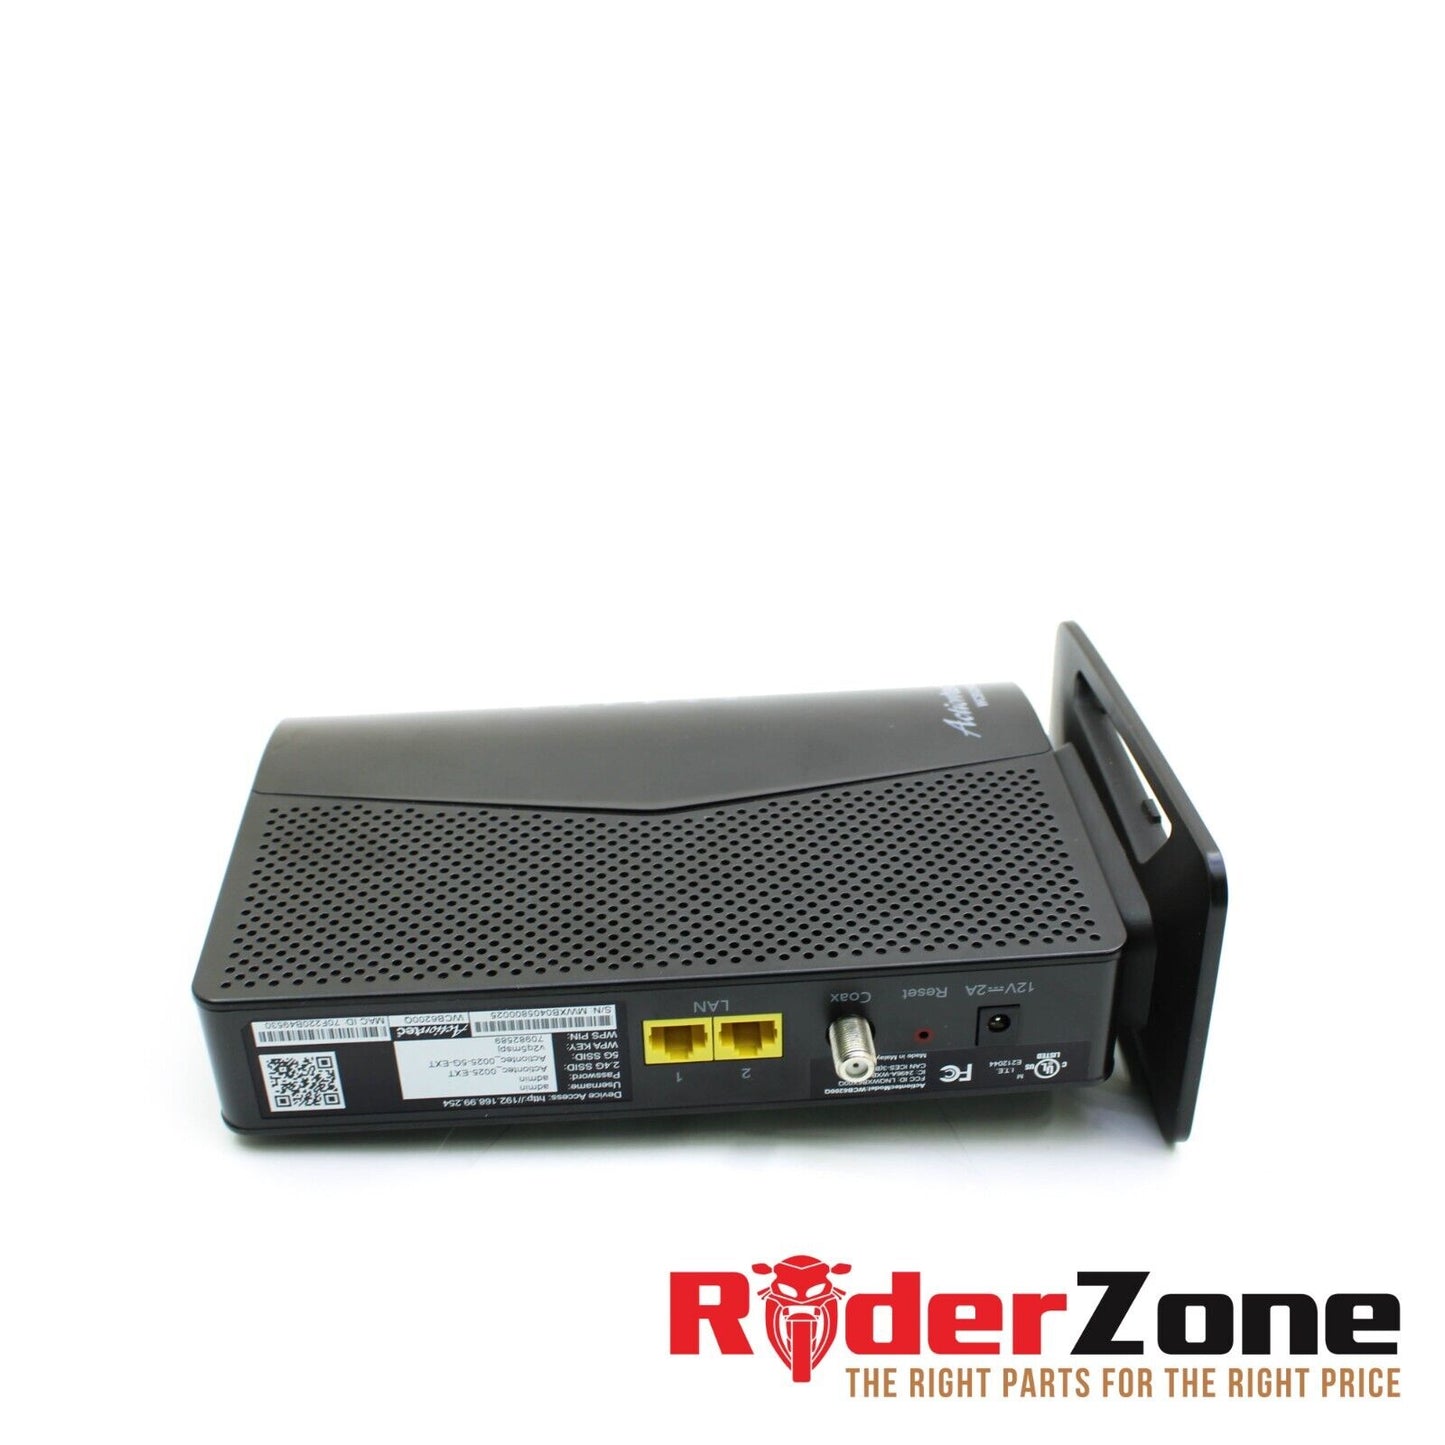 ACTION TEC 802.11AC WIRELESS NETWORK EXTENDER WCB6200Q